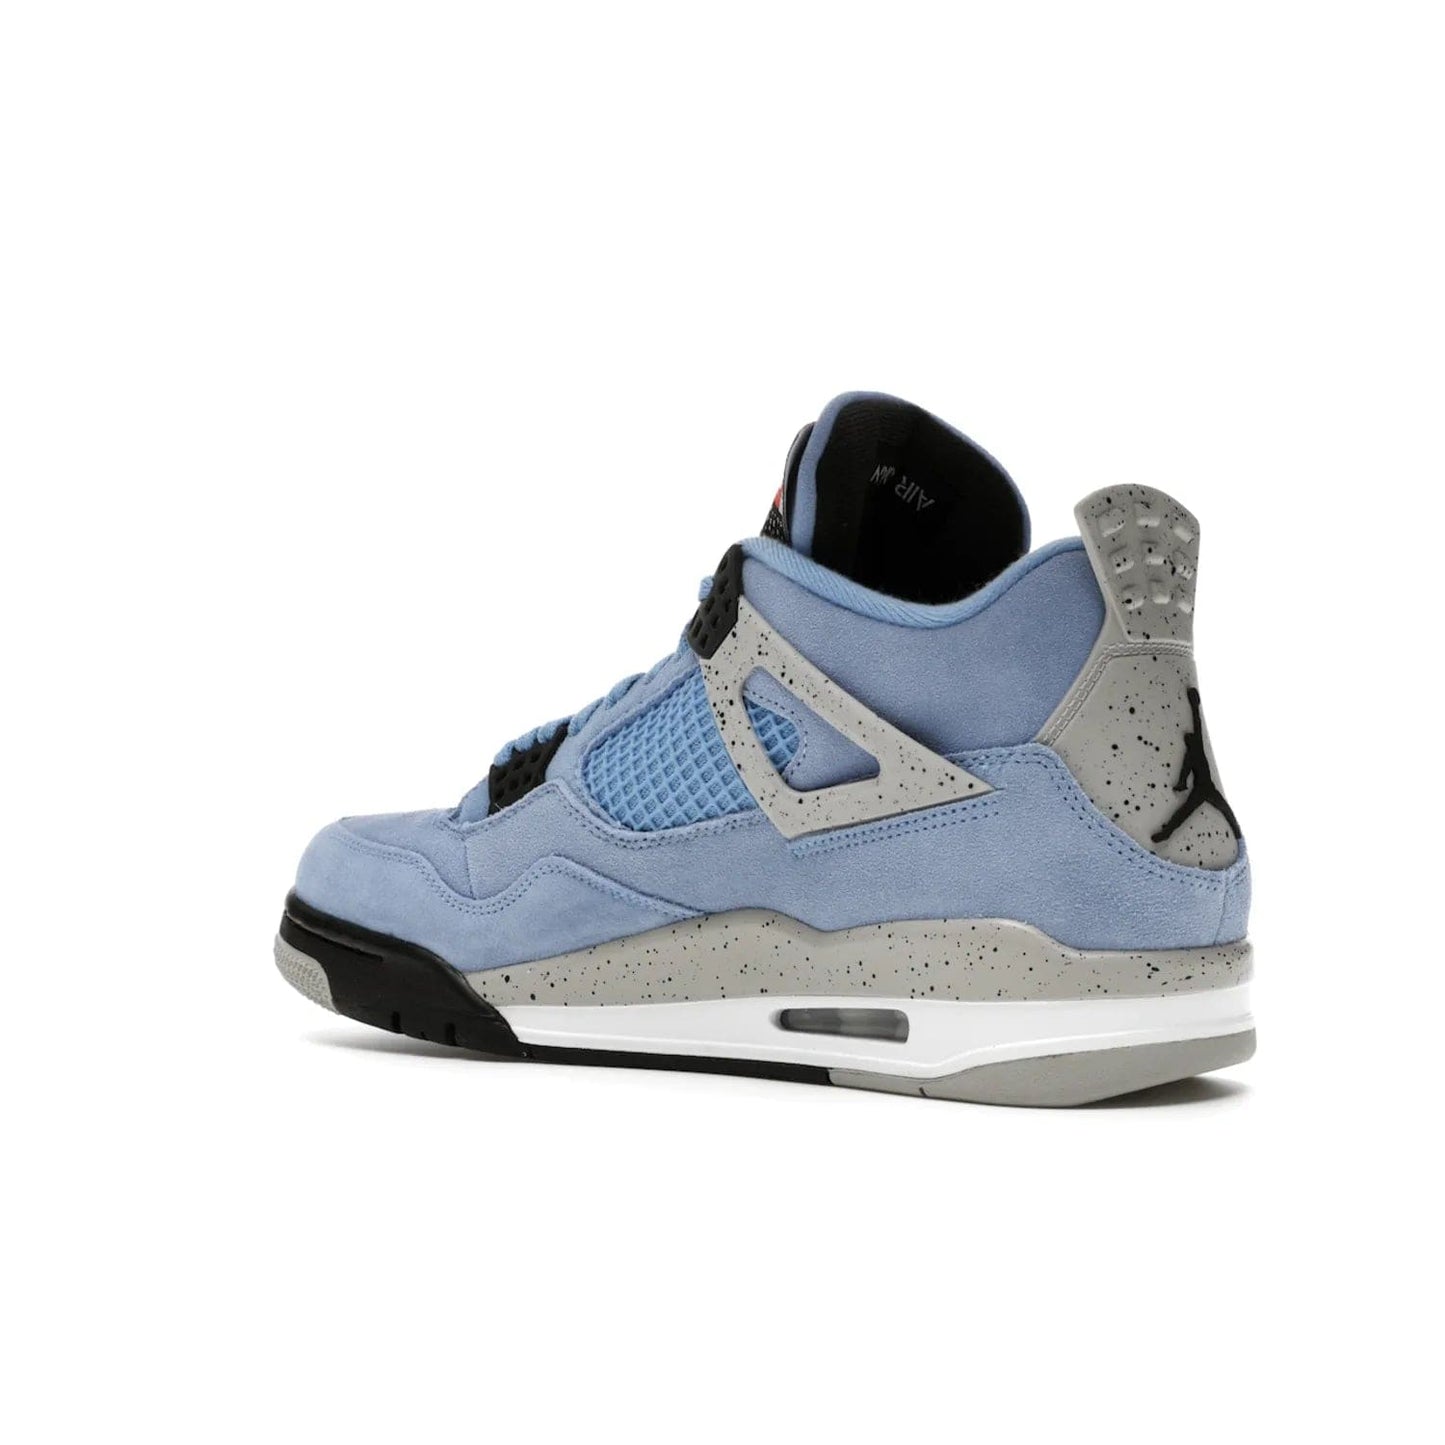 Jordan 4 Retro University Blue - Image 23 - Only at www.BallersClubKickz.com - The Air Jordan 4 University Blue honors MJ's alma mater. Rich University Blue suede, panels of netting, and Cement Grey speckled eyelets give this design an edgy look. Features a black, white and Tech Grey sole with a clear Air unit and two woven labels on the tongue. Jumpman logo & Team Jordan jock tag included. Released April 2021.